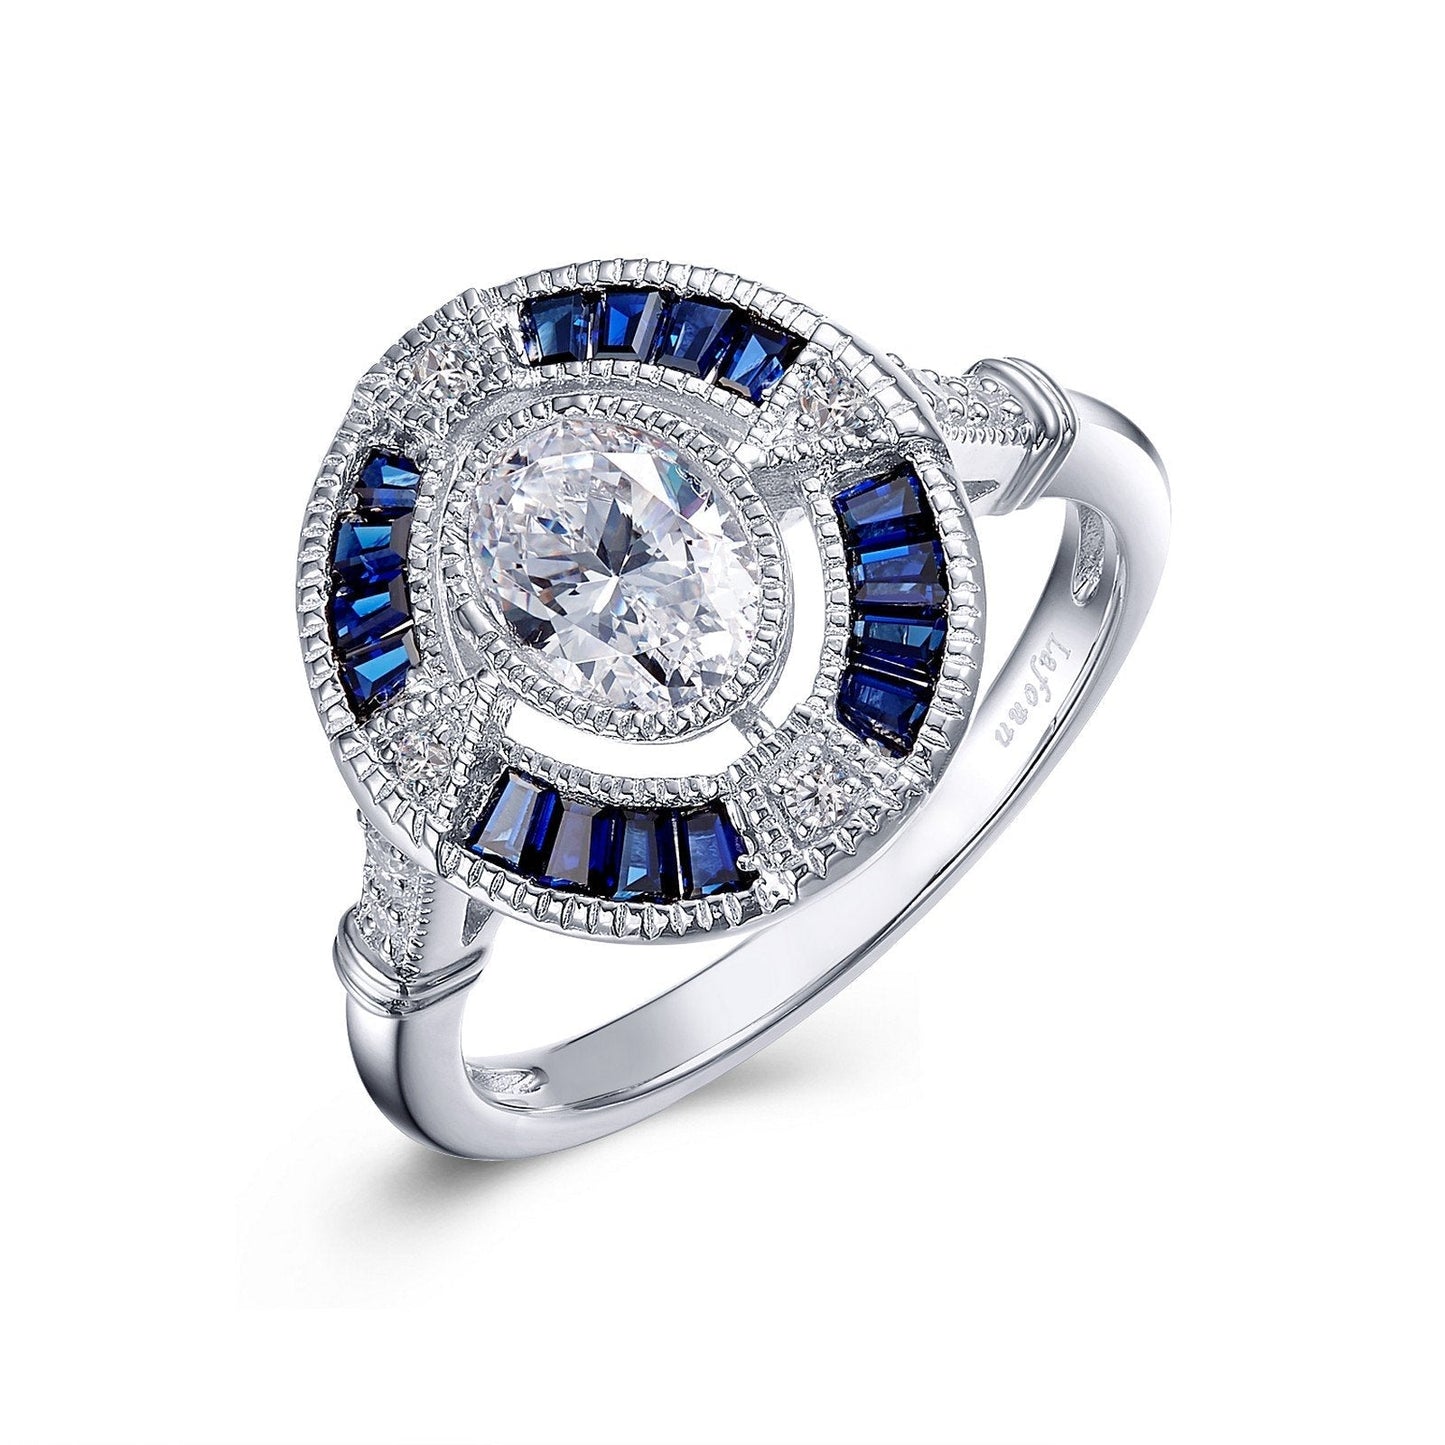 Lafonn Vintage Inspired Engagement Ring Sapphire RINGS Size 5 Platinum 2.47 CTS Approx. 15.2mm (H) x 14.5mm (W)